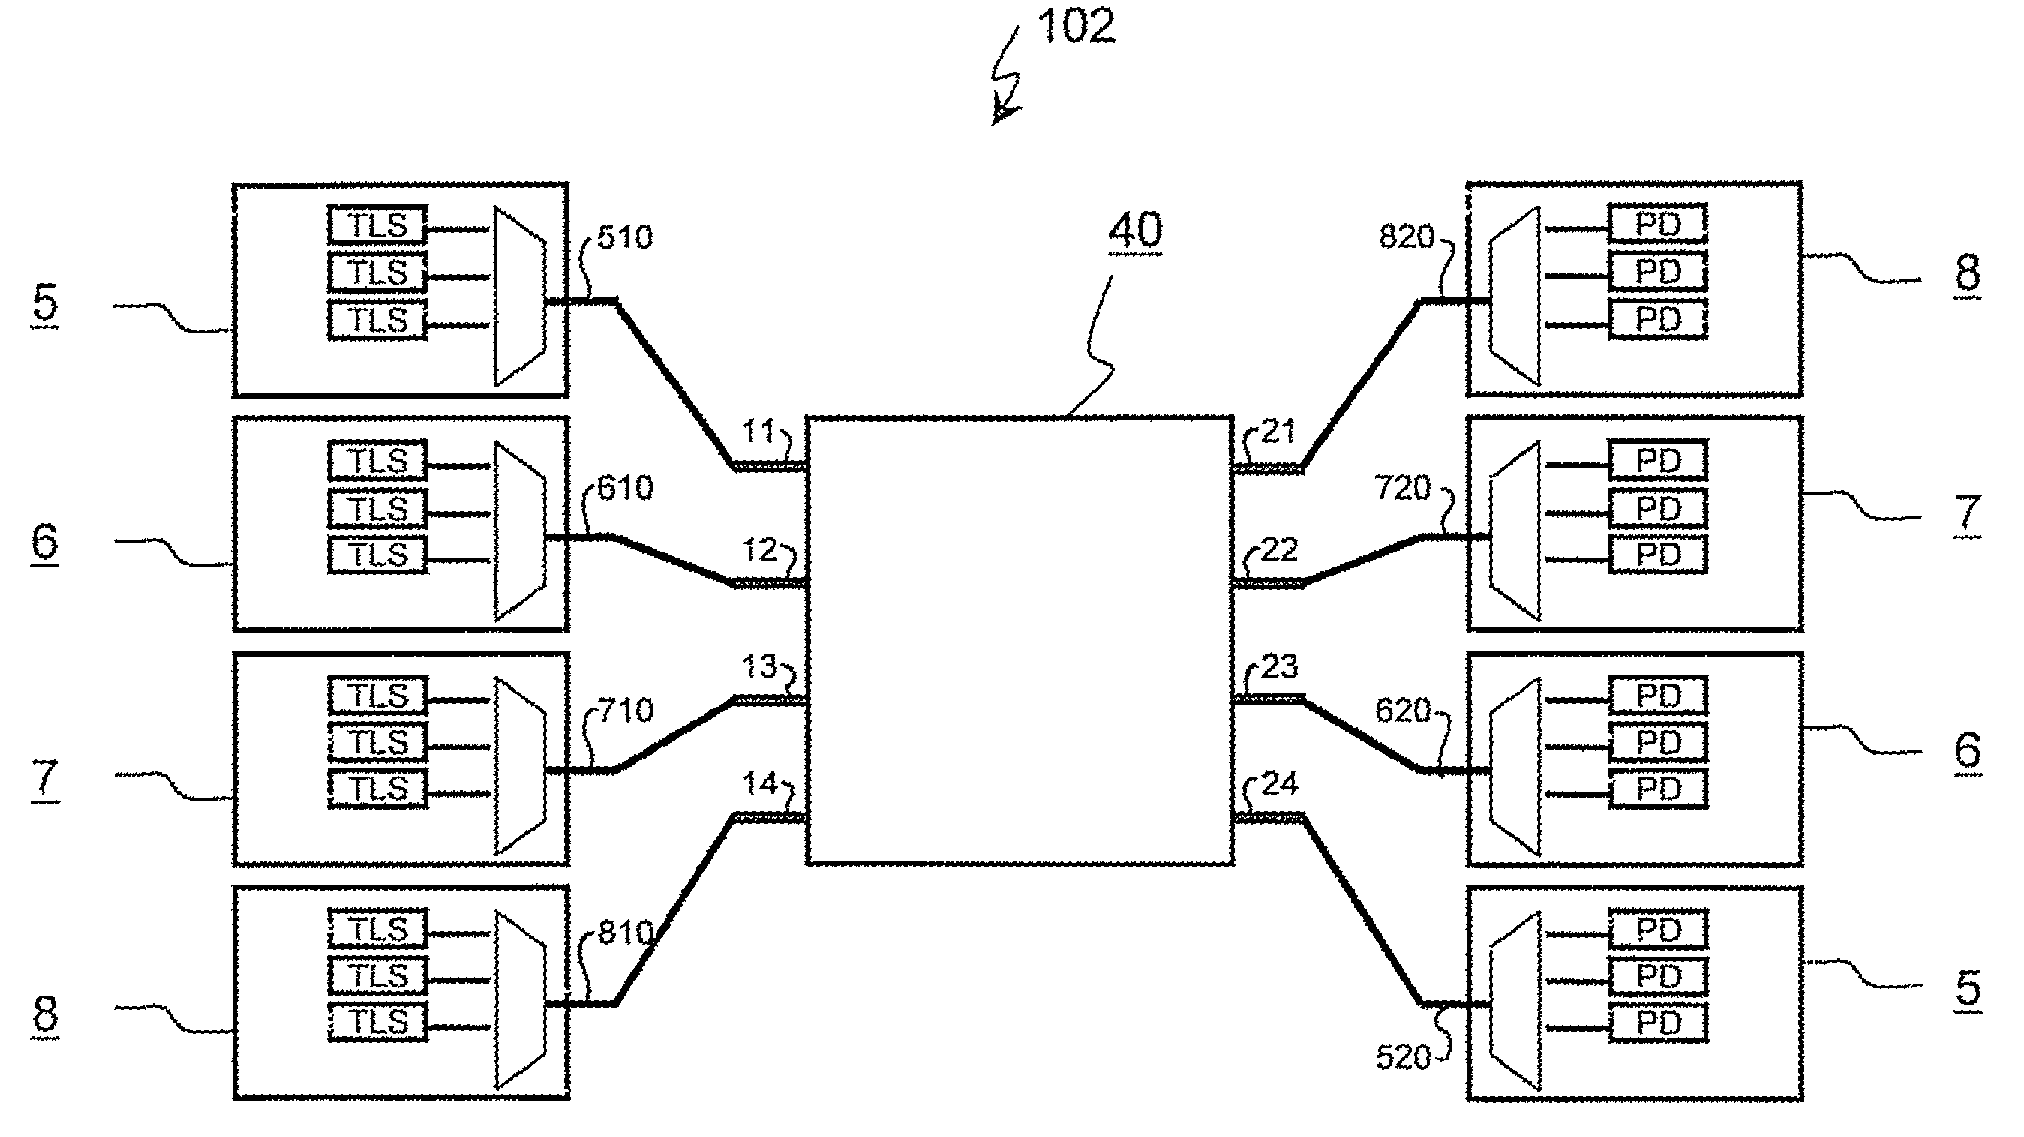 Wavelength routing system